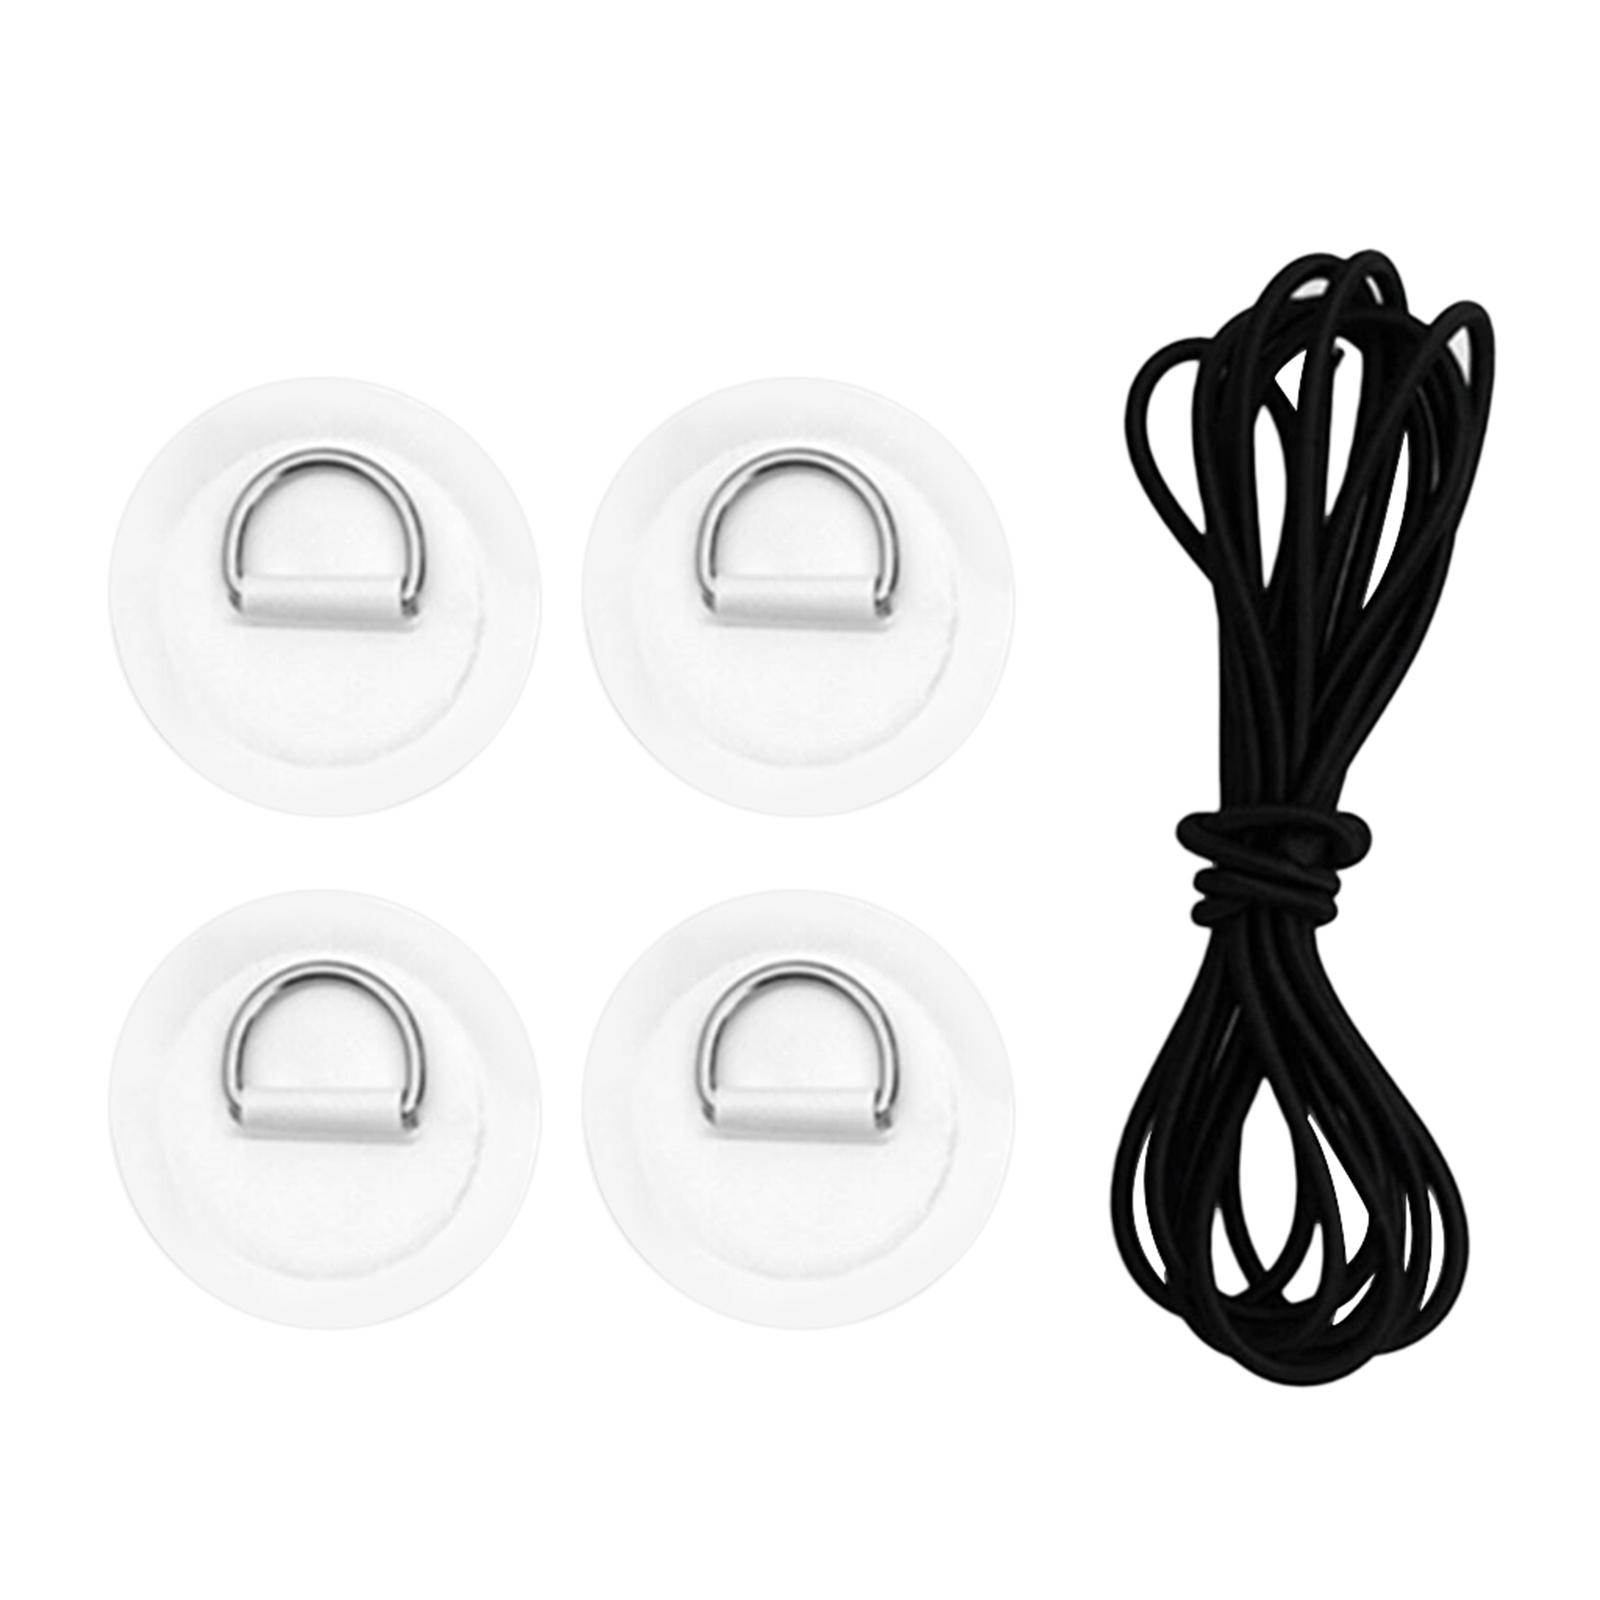 D-ring Pad/Patch 5mm Bungee Cord for PVC Inflatable Boat Dinghy Kayak Black 